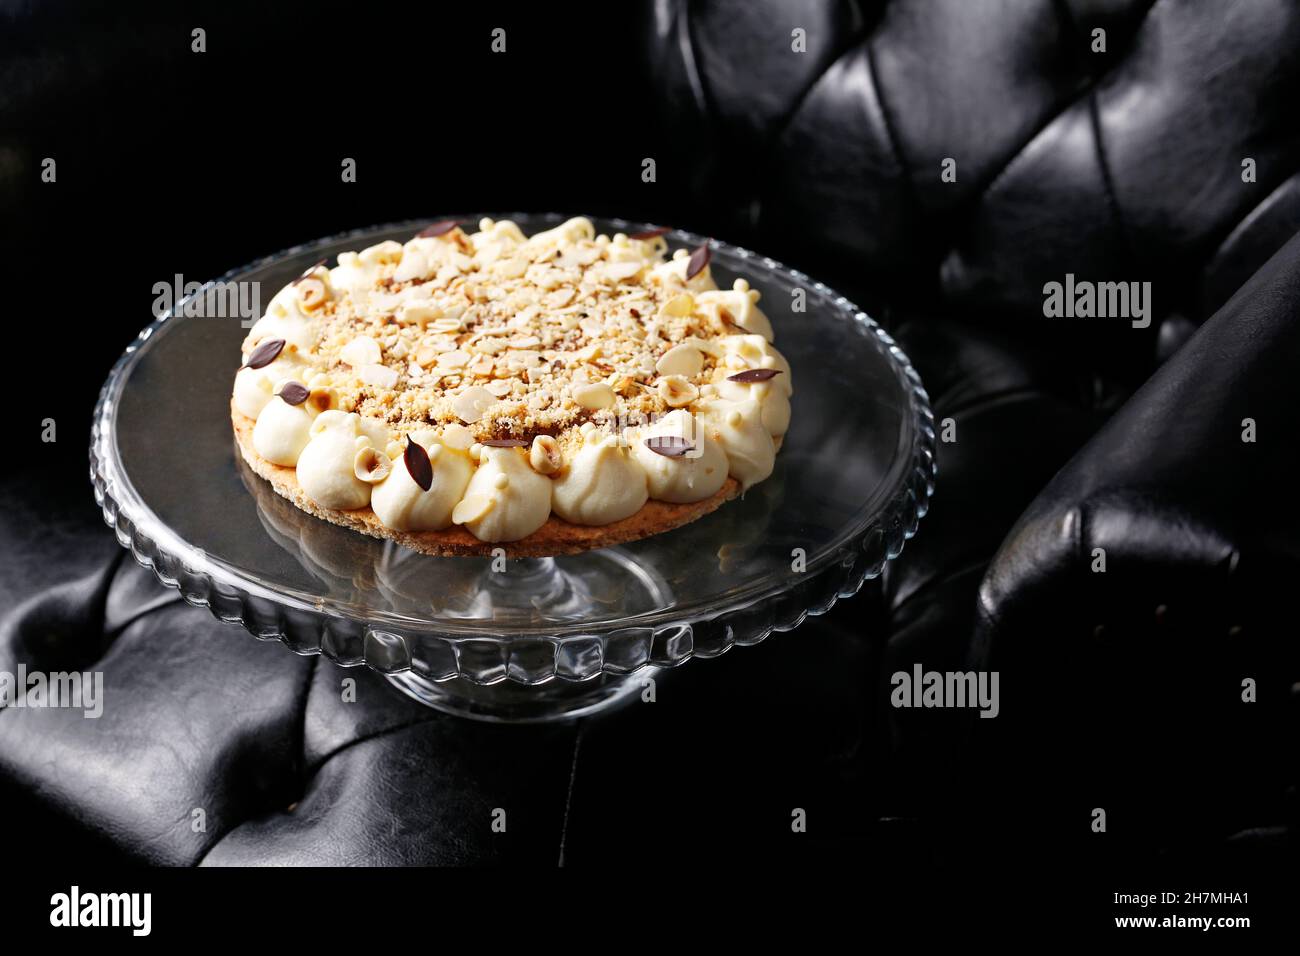 Shortcrust pastry with apples, meringue and nuts. Sweet dessert. A tasty dish.Culinary photography. Suggestion to serve the dish. Stock Photo